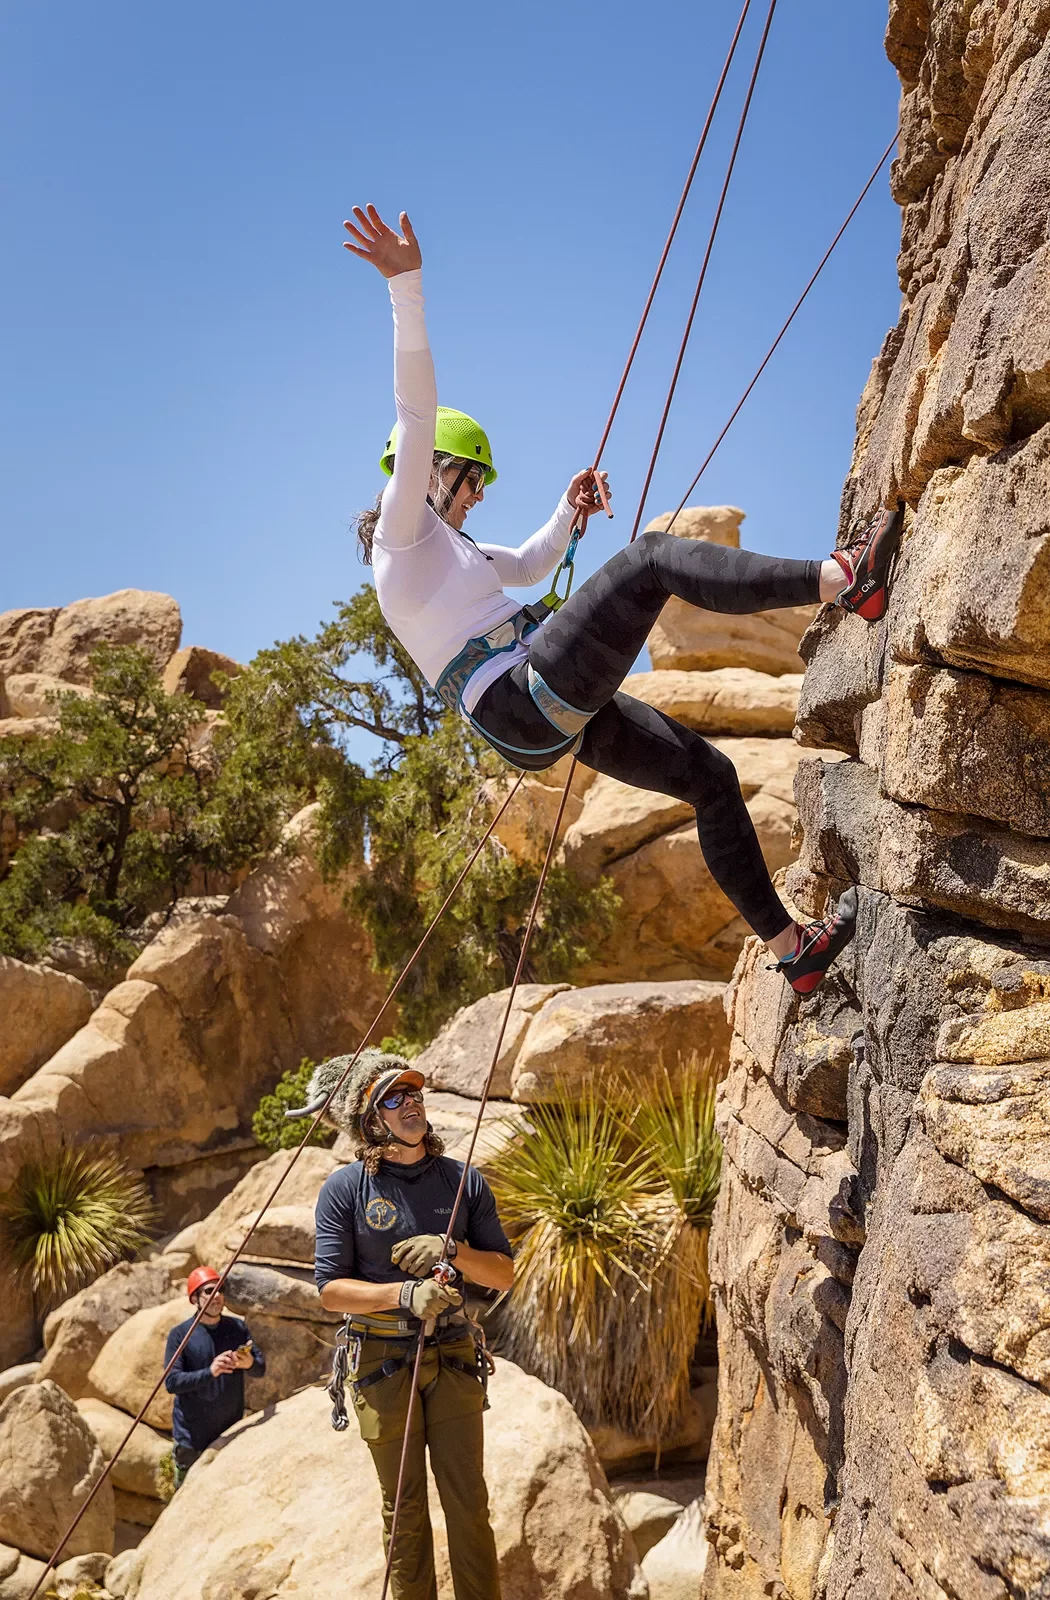 Three guests rock climbing, one is waving to the camera.